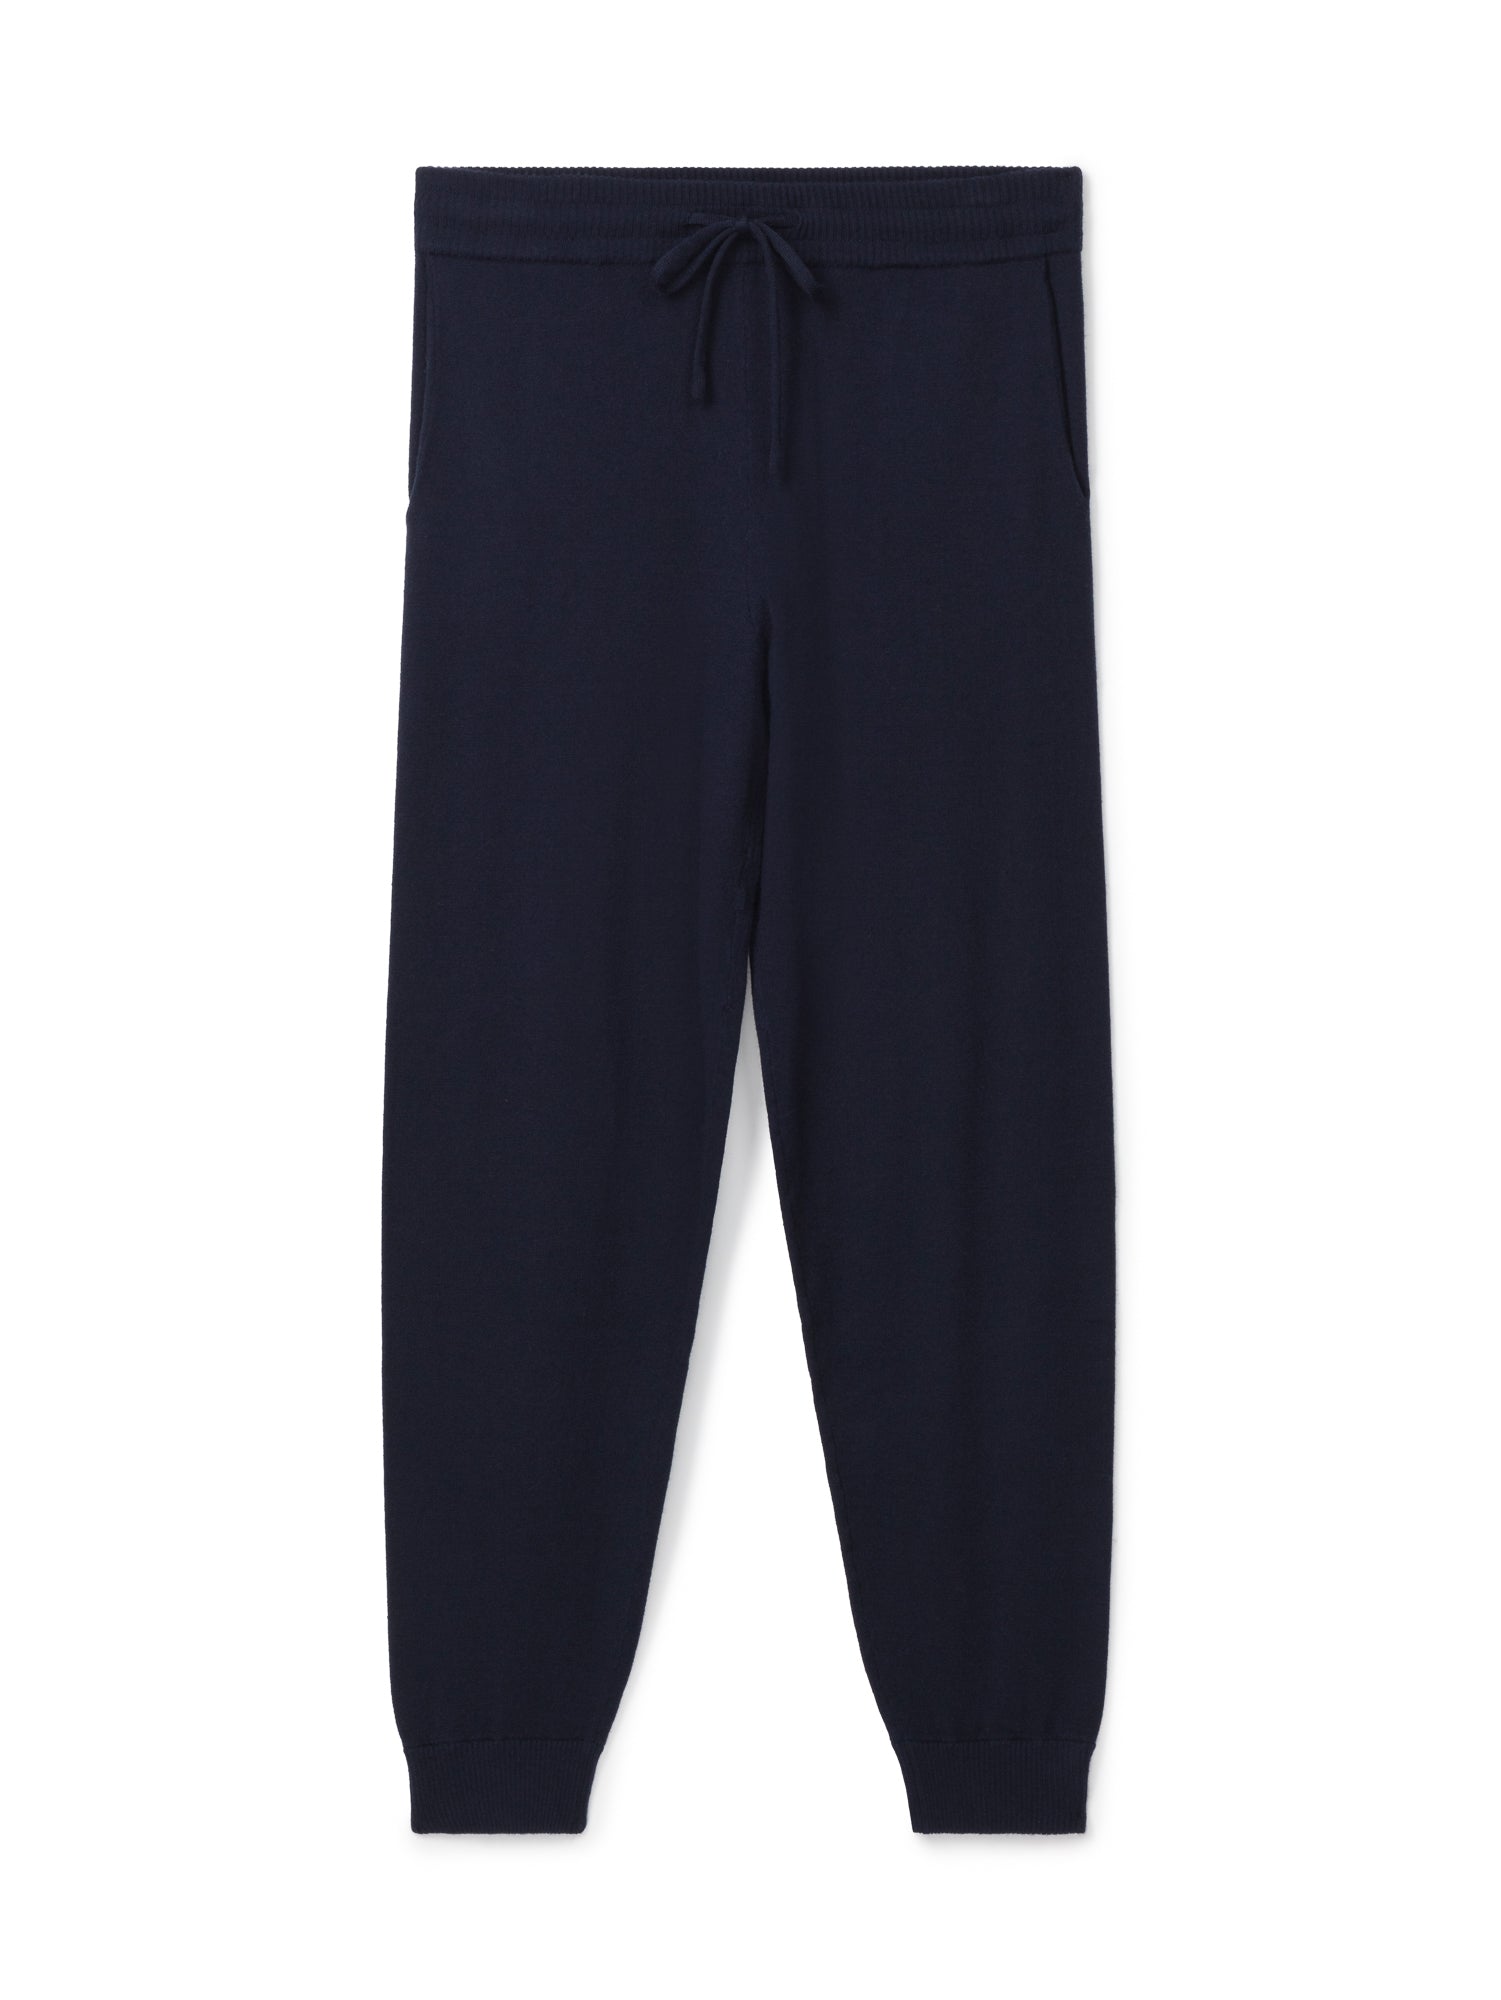 Lucy Knit Pant